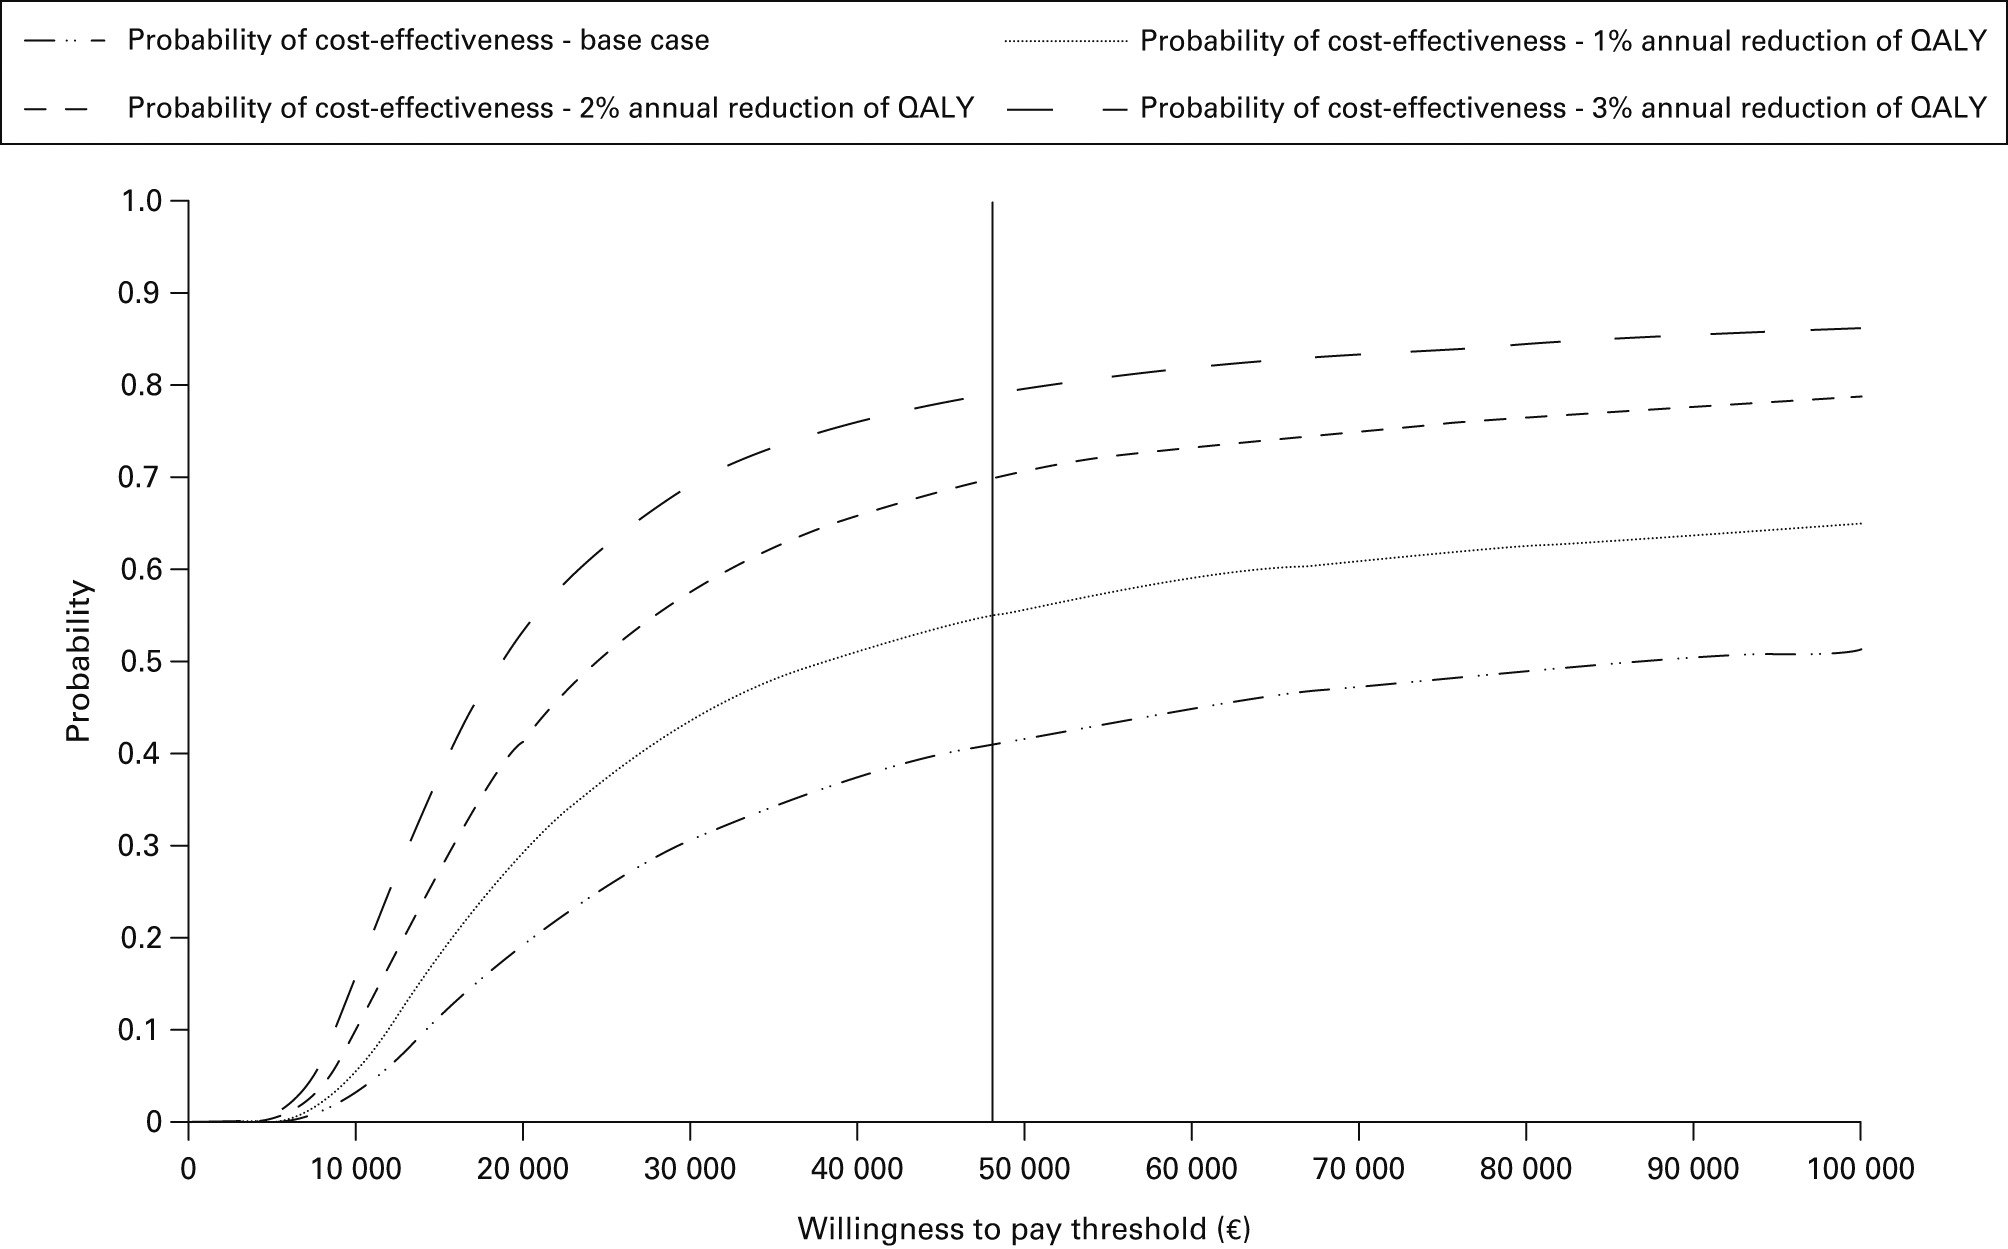 Fig. 3 
          Cost-effectiveness acceptability curve showing
the probability of osseointegrated (OI-) prosthesis being cost-effective
for a range of willingness-to-pay values for the base case, as well
as scenarios for utility decreases over time for socket-suspended
(S-) prosthesis. The scenario with a 3% annual reduction of utility
results in a probability of the OI-prosthesis being cost-effective
at approximately 80% for conventional willingness-to-pay values
for a quality-adjusted life-year (QALY). The vertical line indicates
the cost-effectiveness threshold.
        